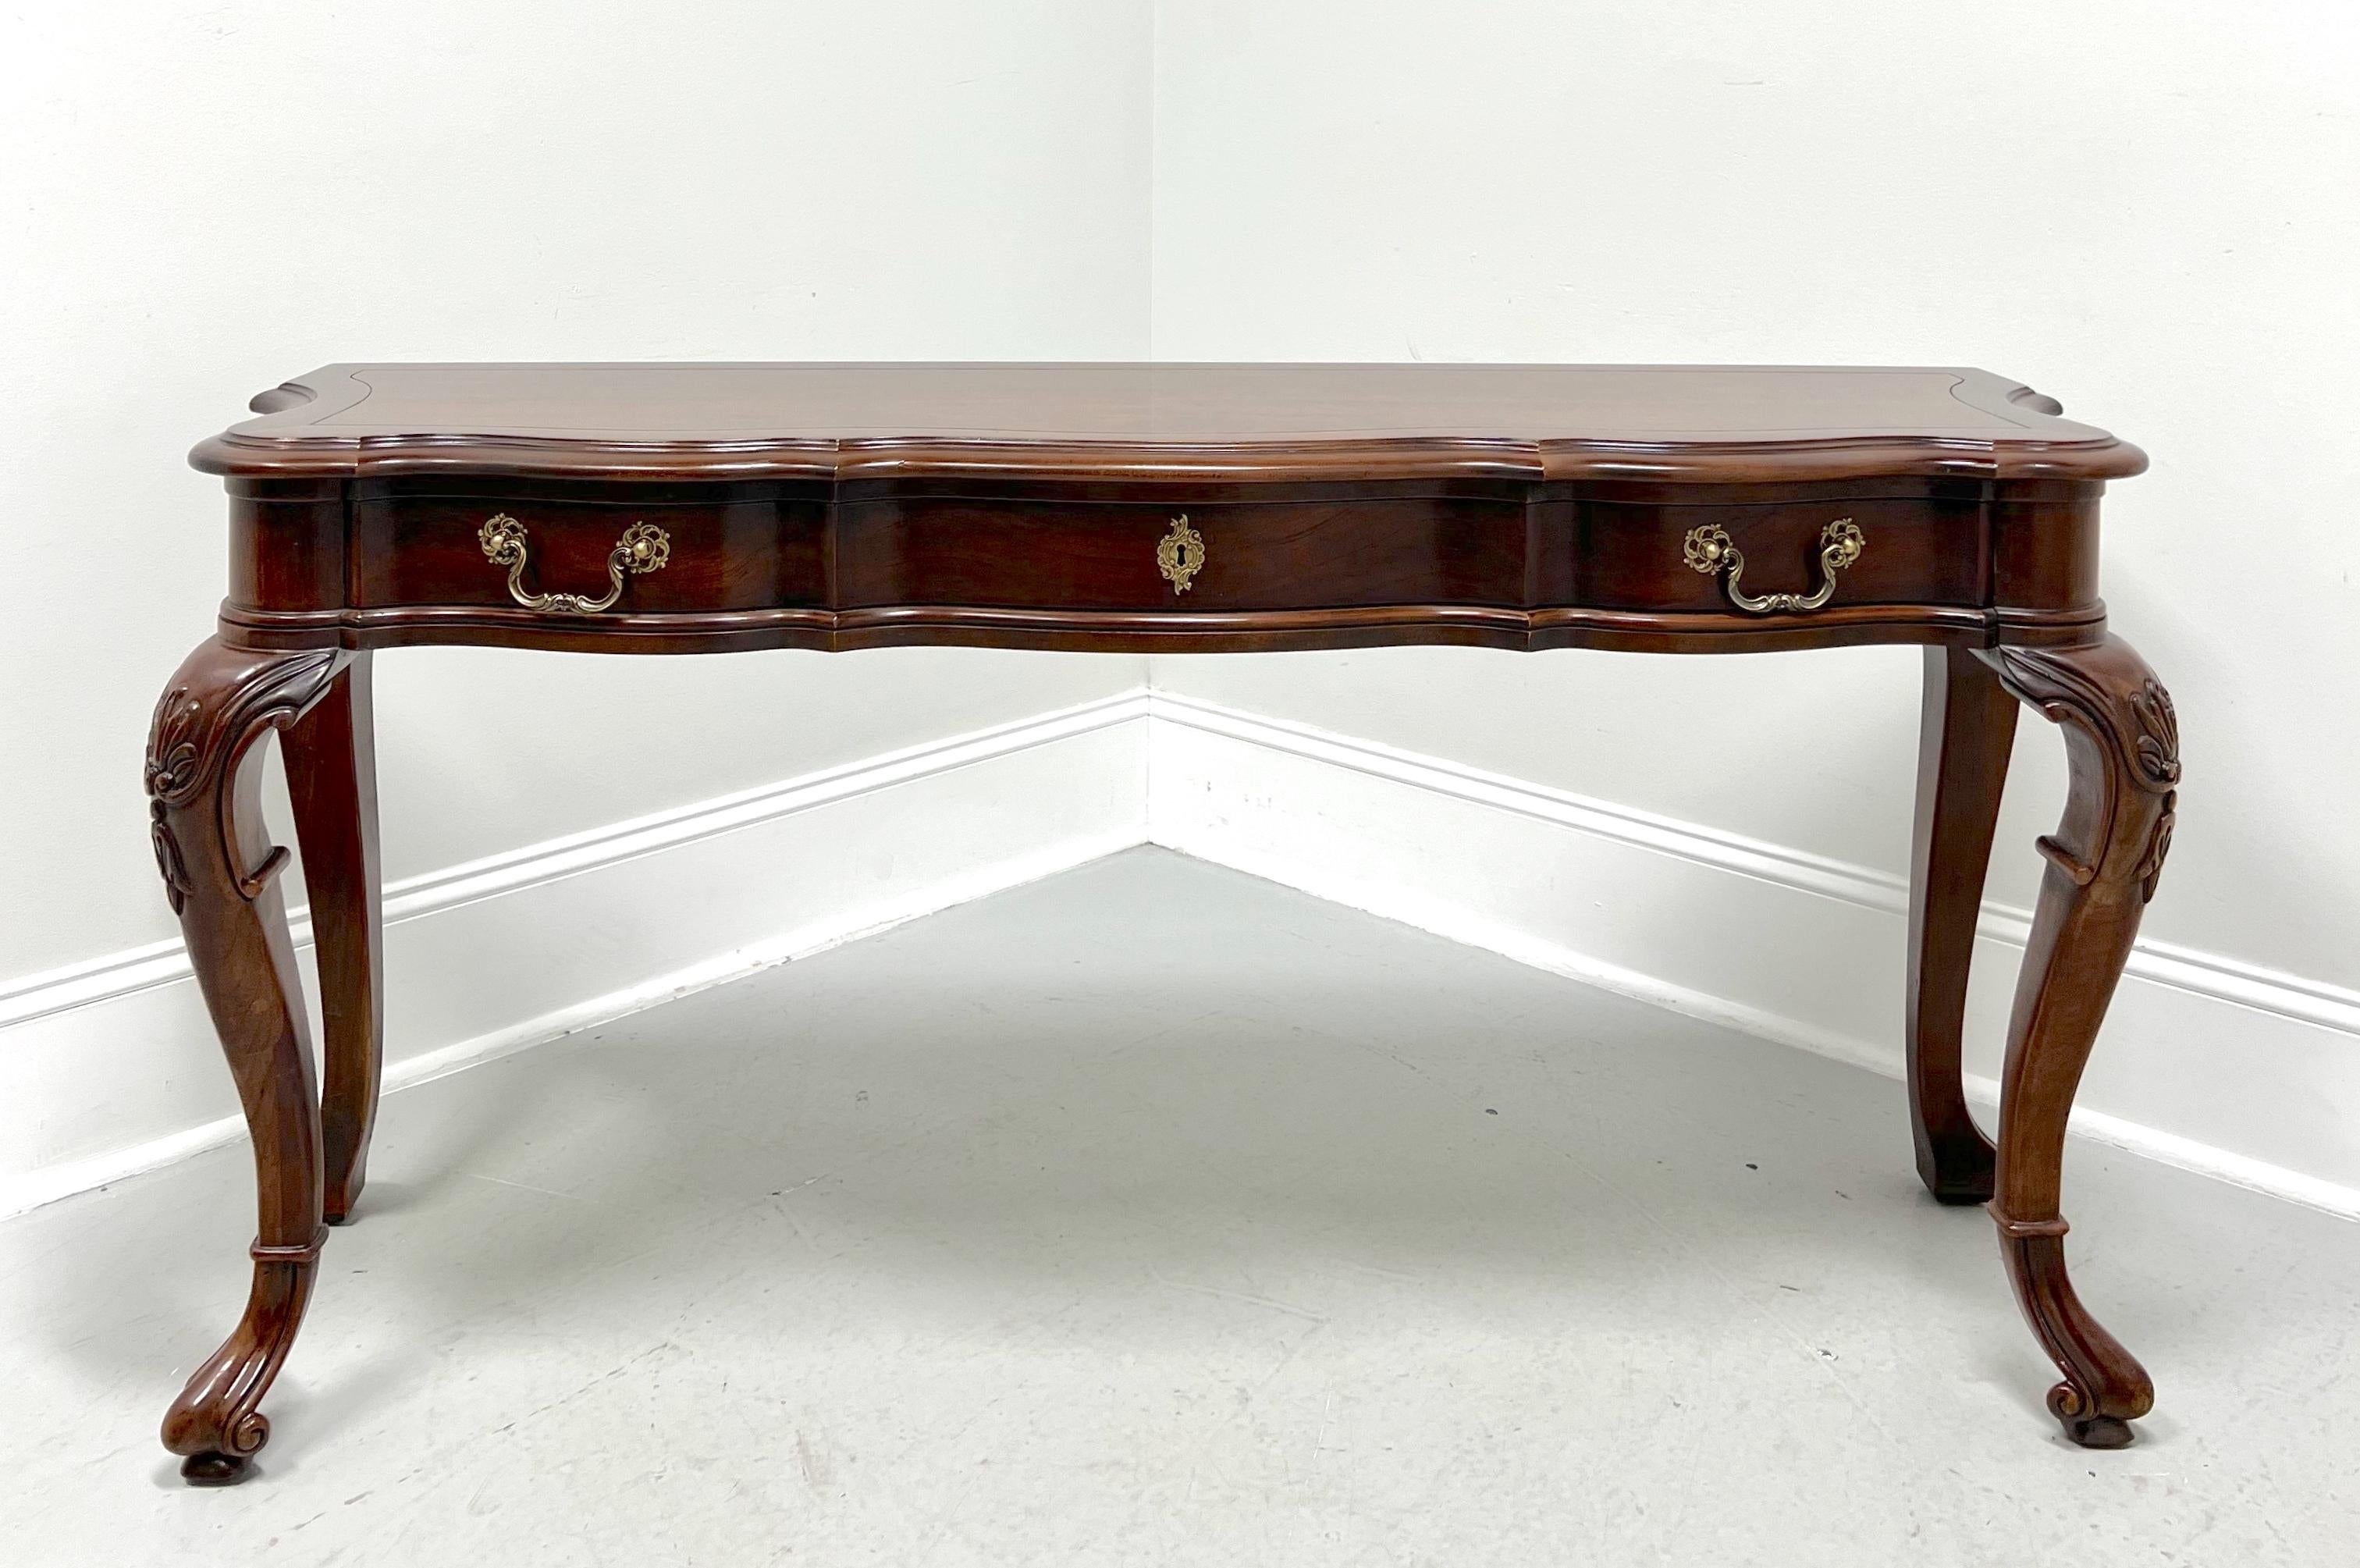 An Italian Provincial style sofa table by Century Furniture, from their Cardella Collection. Cherry wood with decorative brass hardware, banded top with an ogee edge & rounded corners, serpentine shape, carved knees, cabriole legs, and hoof-like